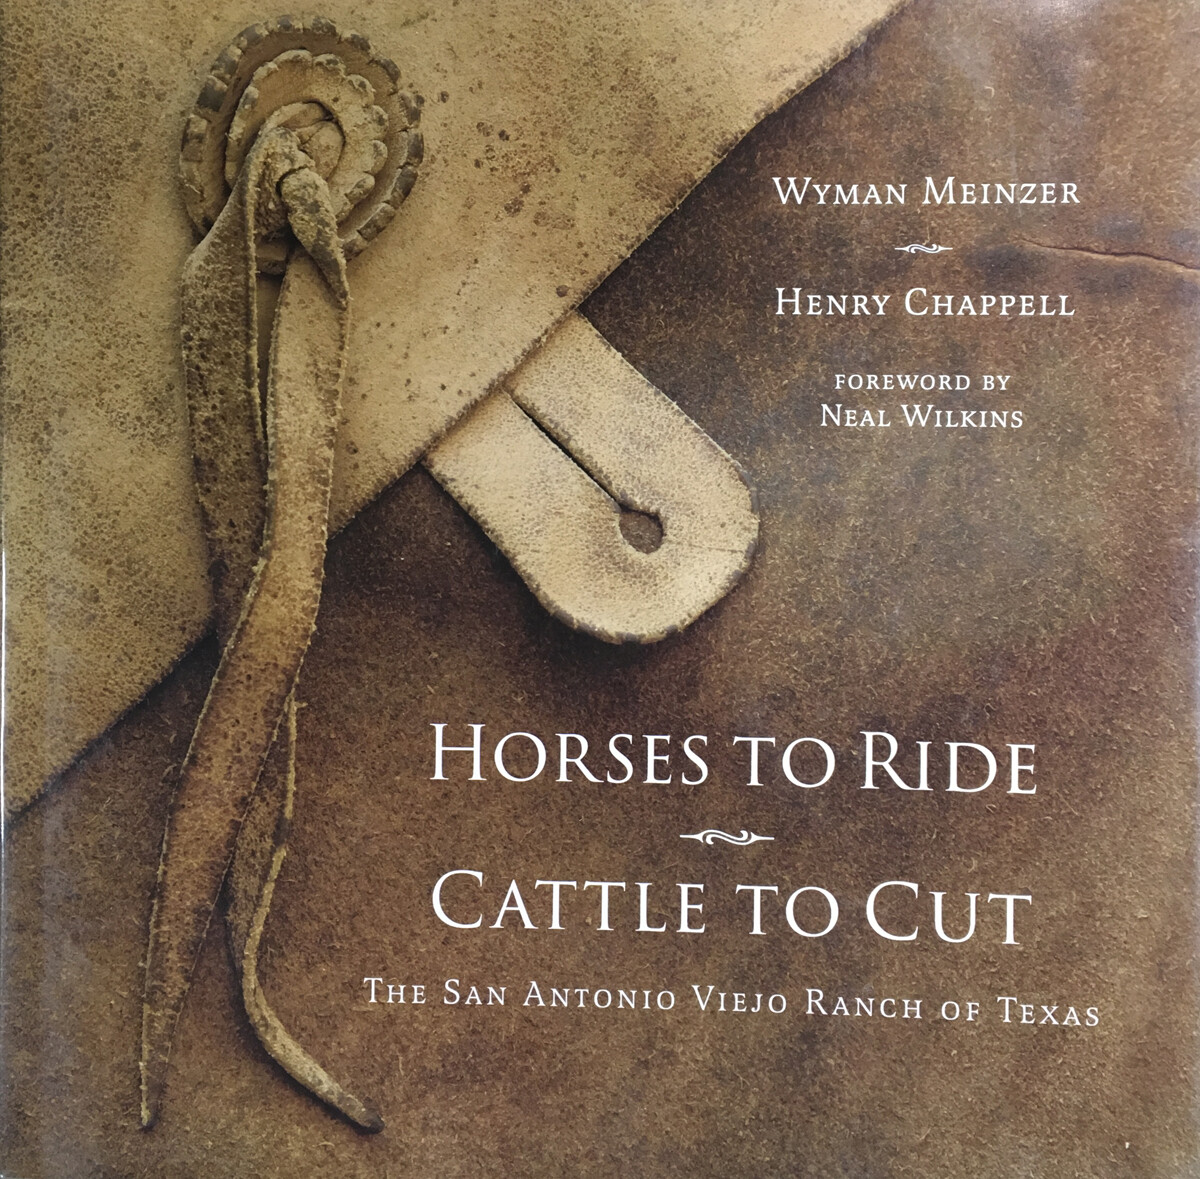 Horses to Ride - Cattle to Cut